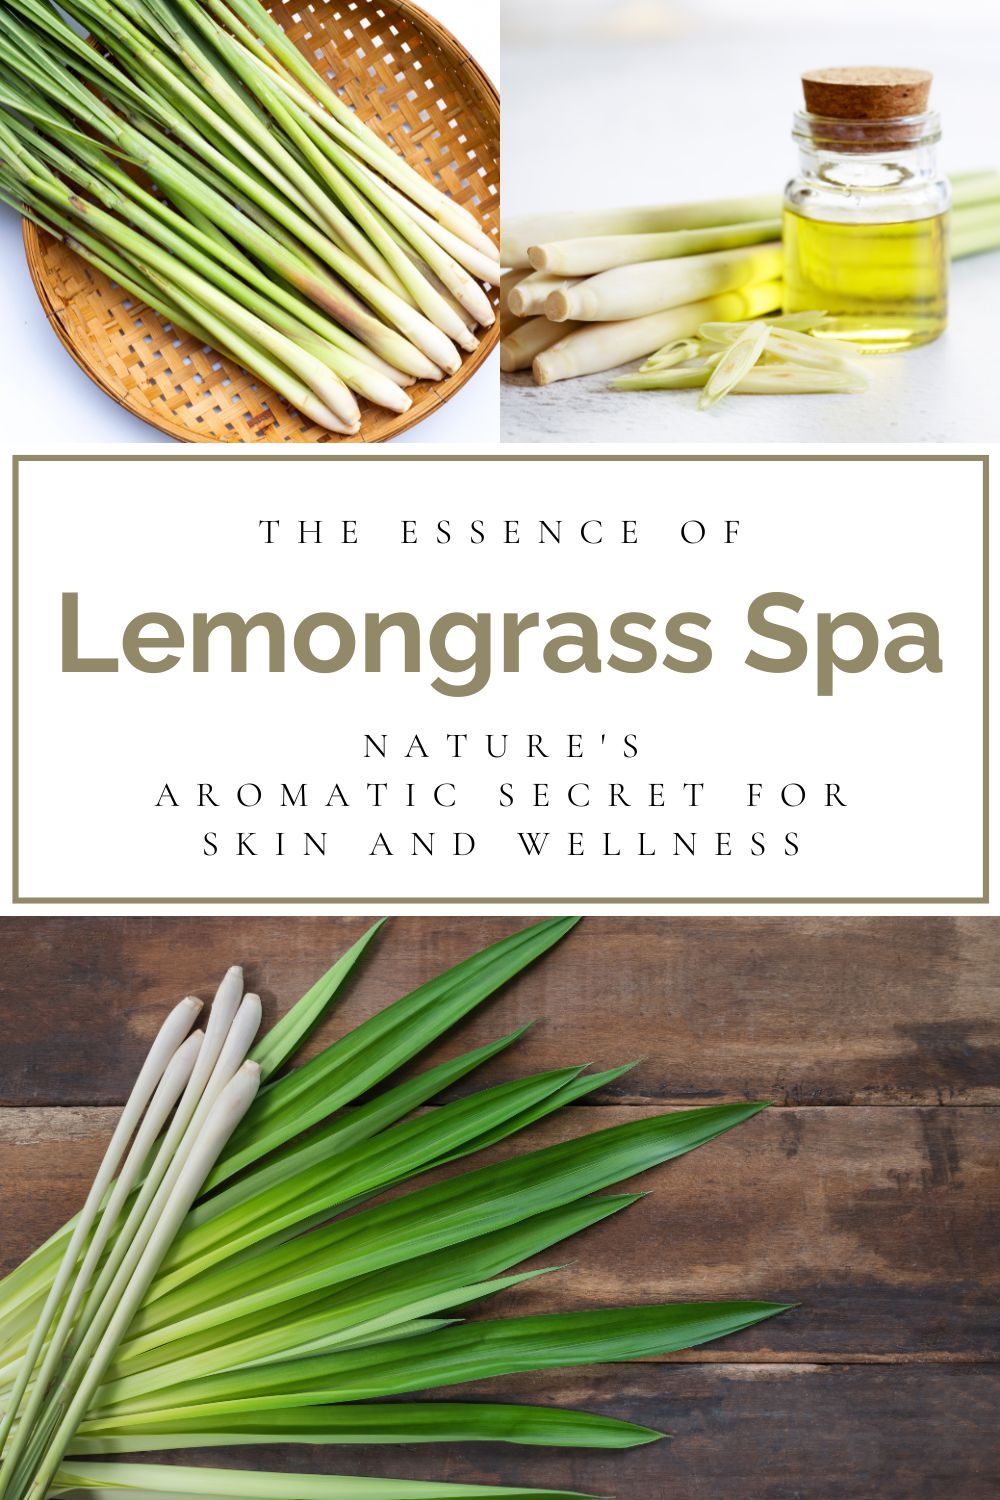 Natural lemongrass spa products by Monsuri for holistic care.